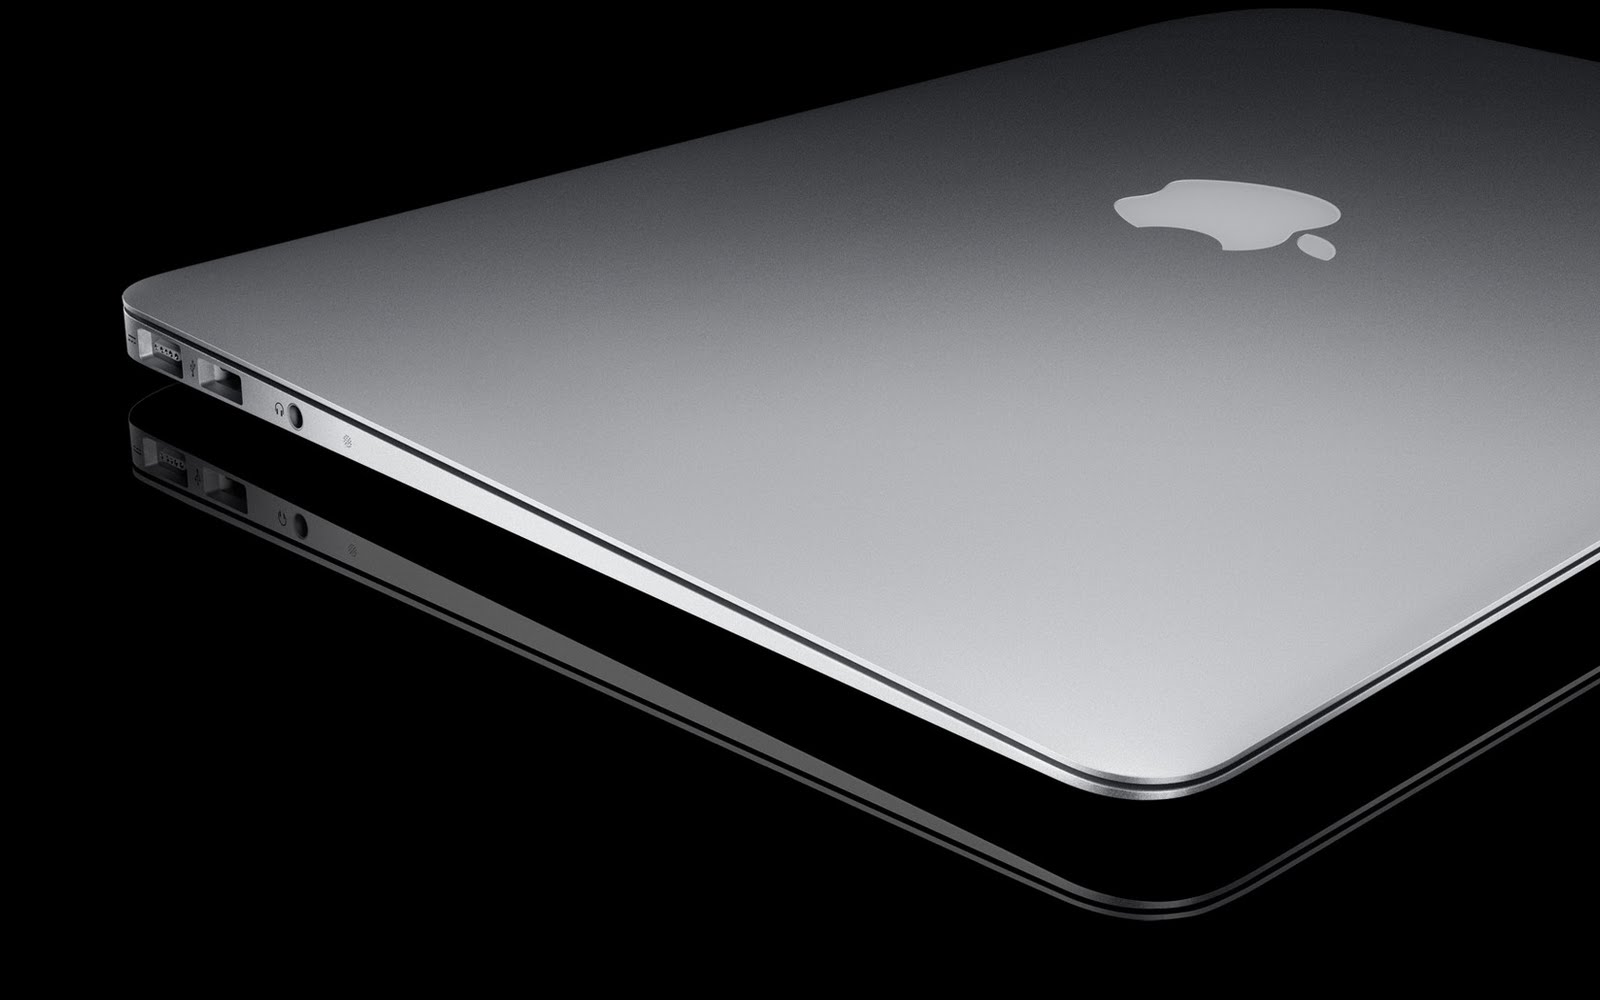 Silver Shiny Apple Mac 1080p HD Wallpaper Is A Great For